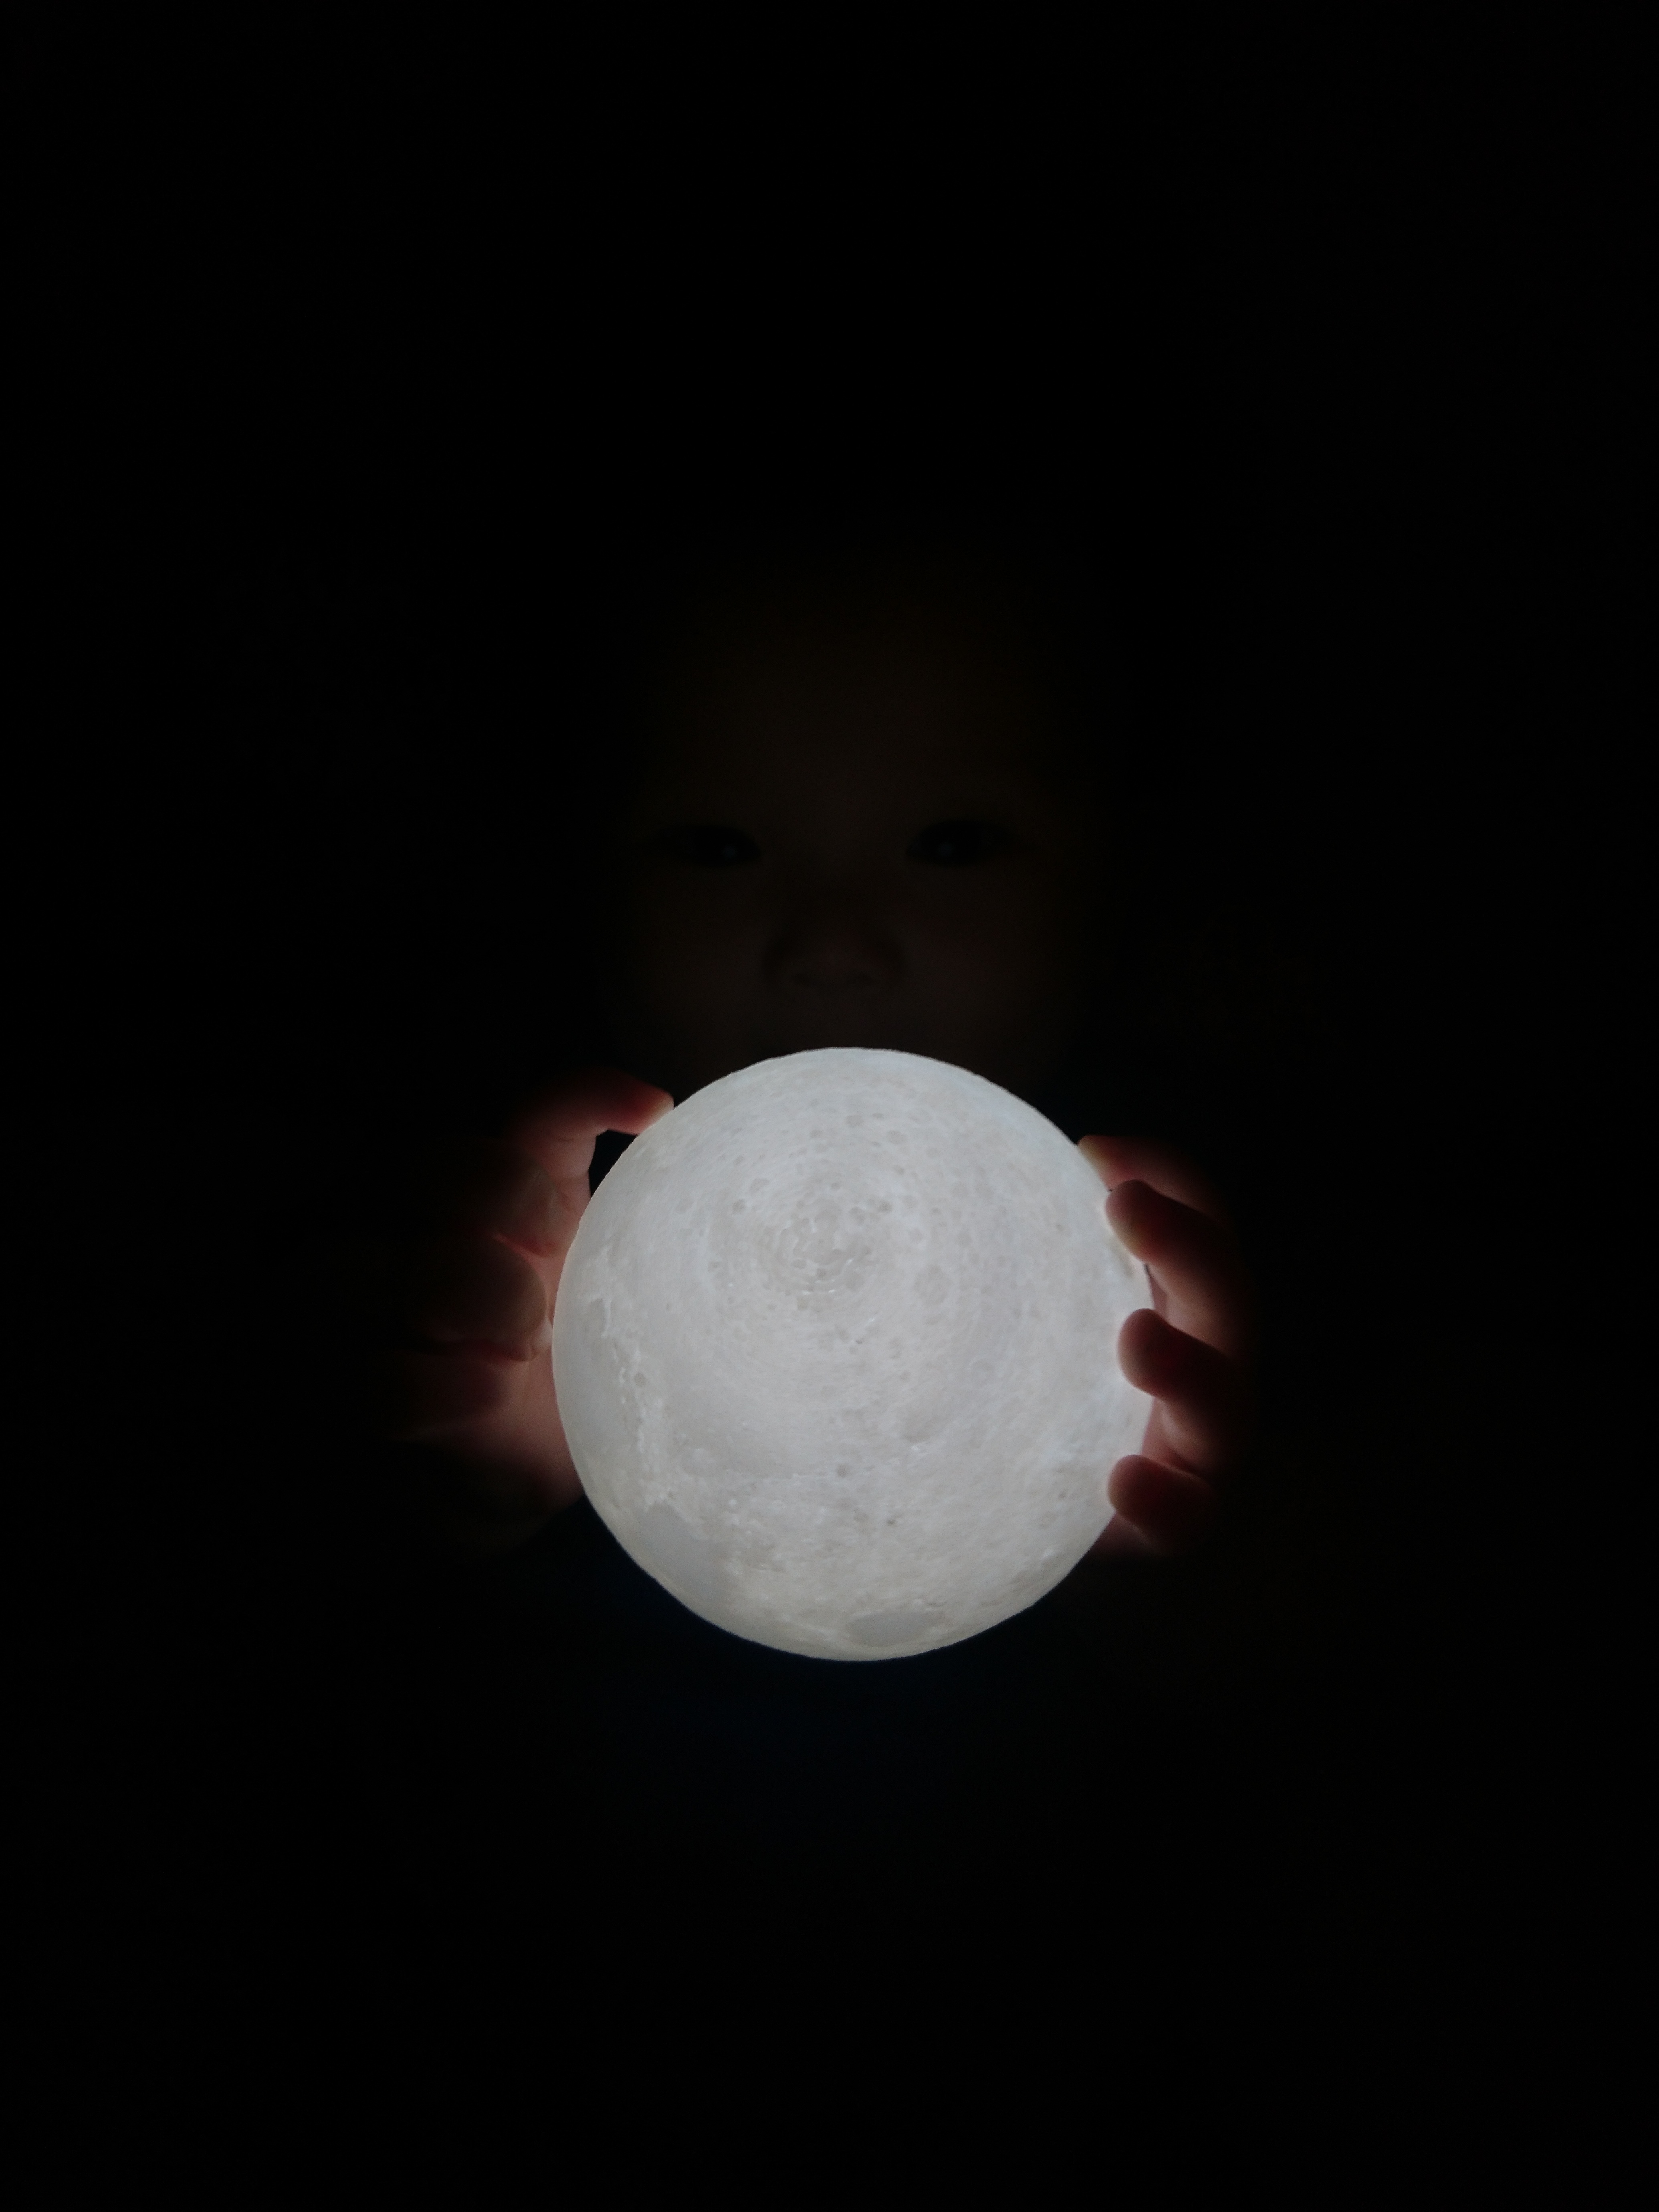 child, hands, glow, dark, moon, ball cell phone wallpapers